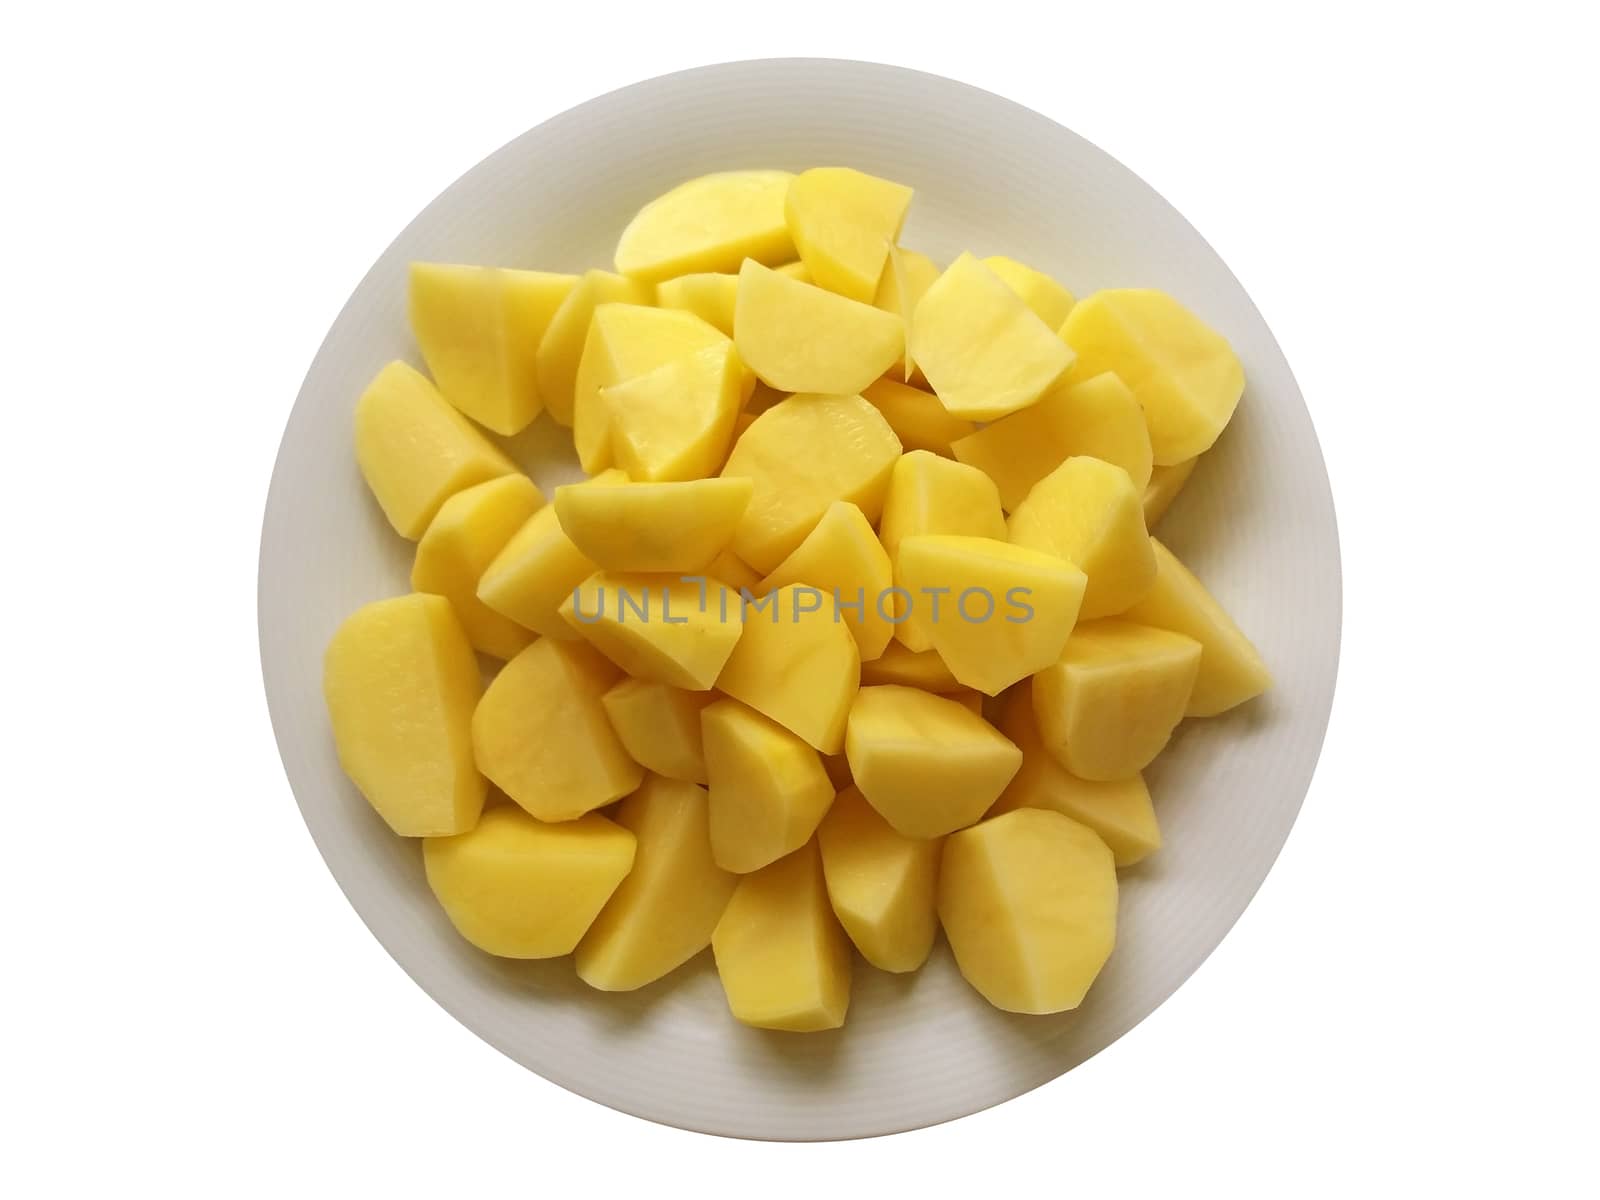 slices of potatoes in a plate on white background